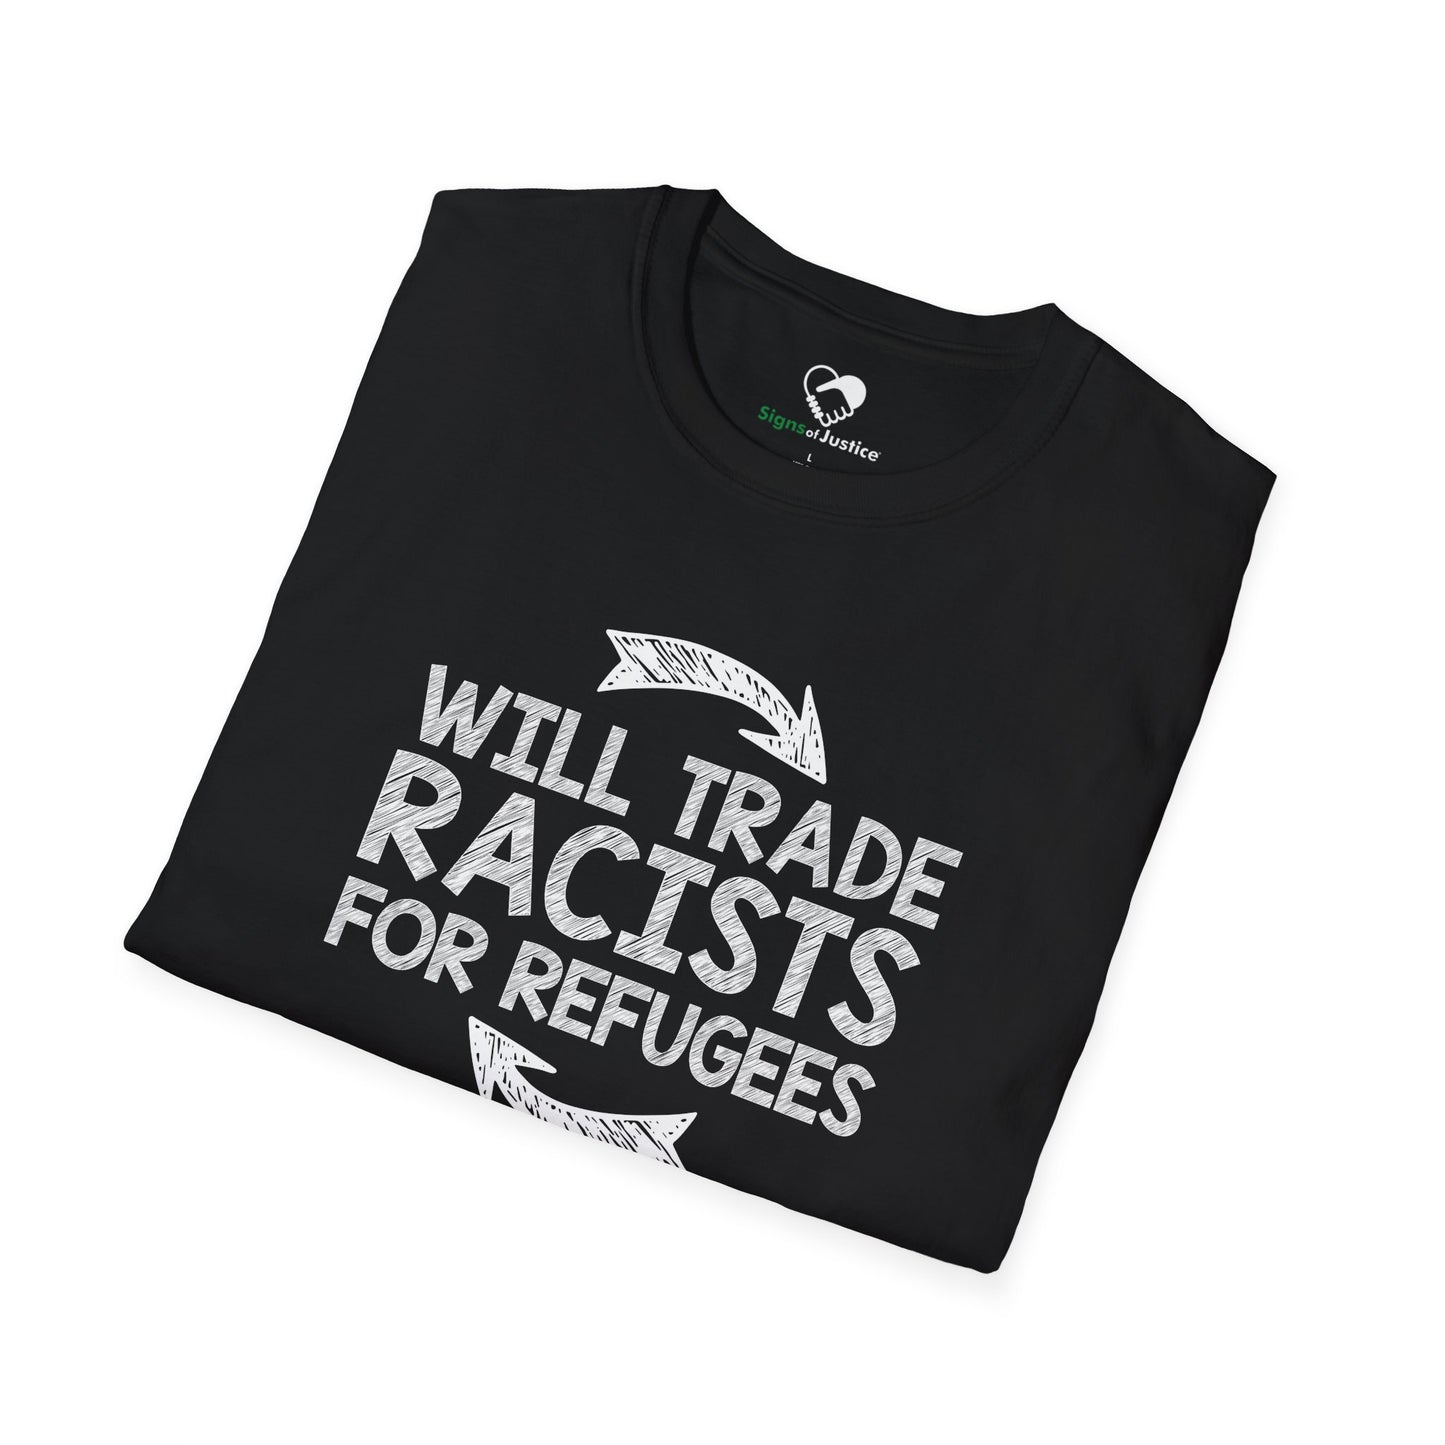 “Will Trade Racists for Refugees” Unisex T-Shirt